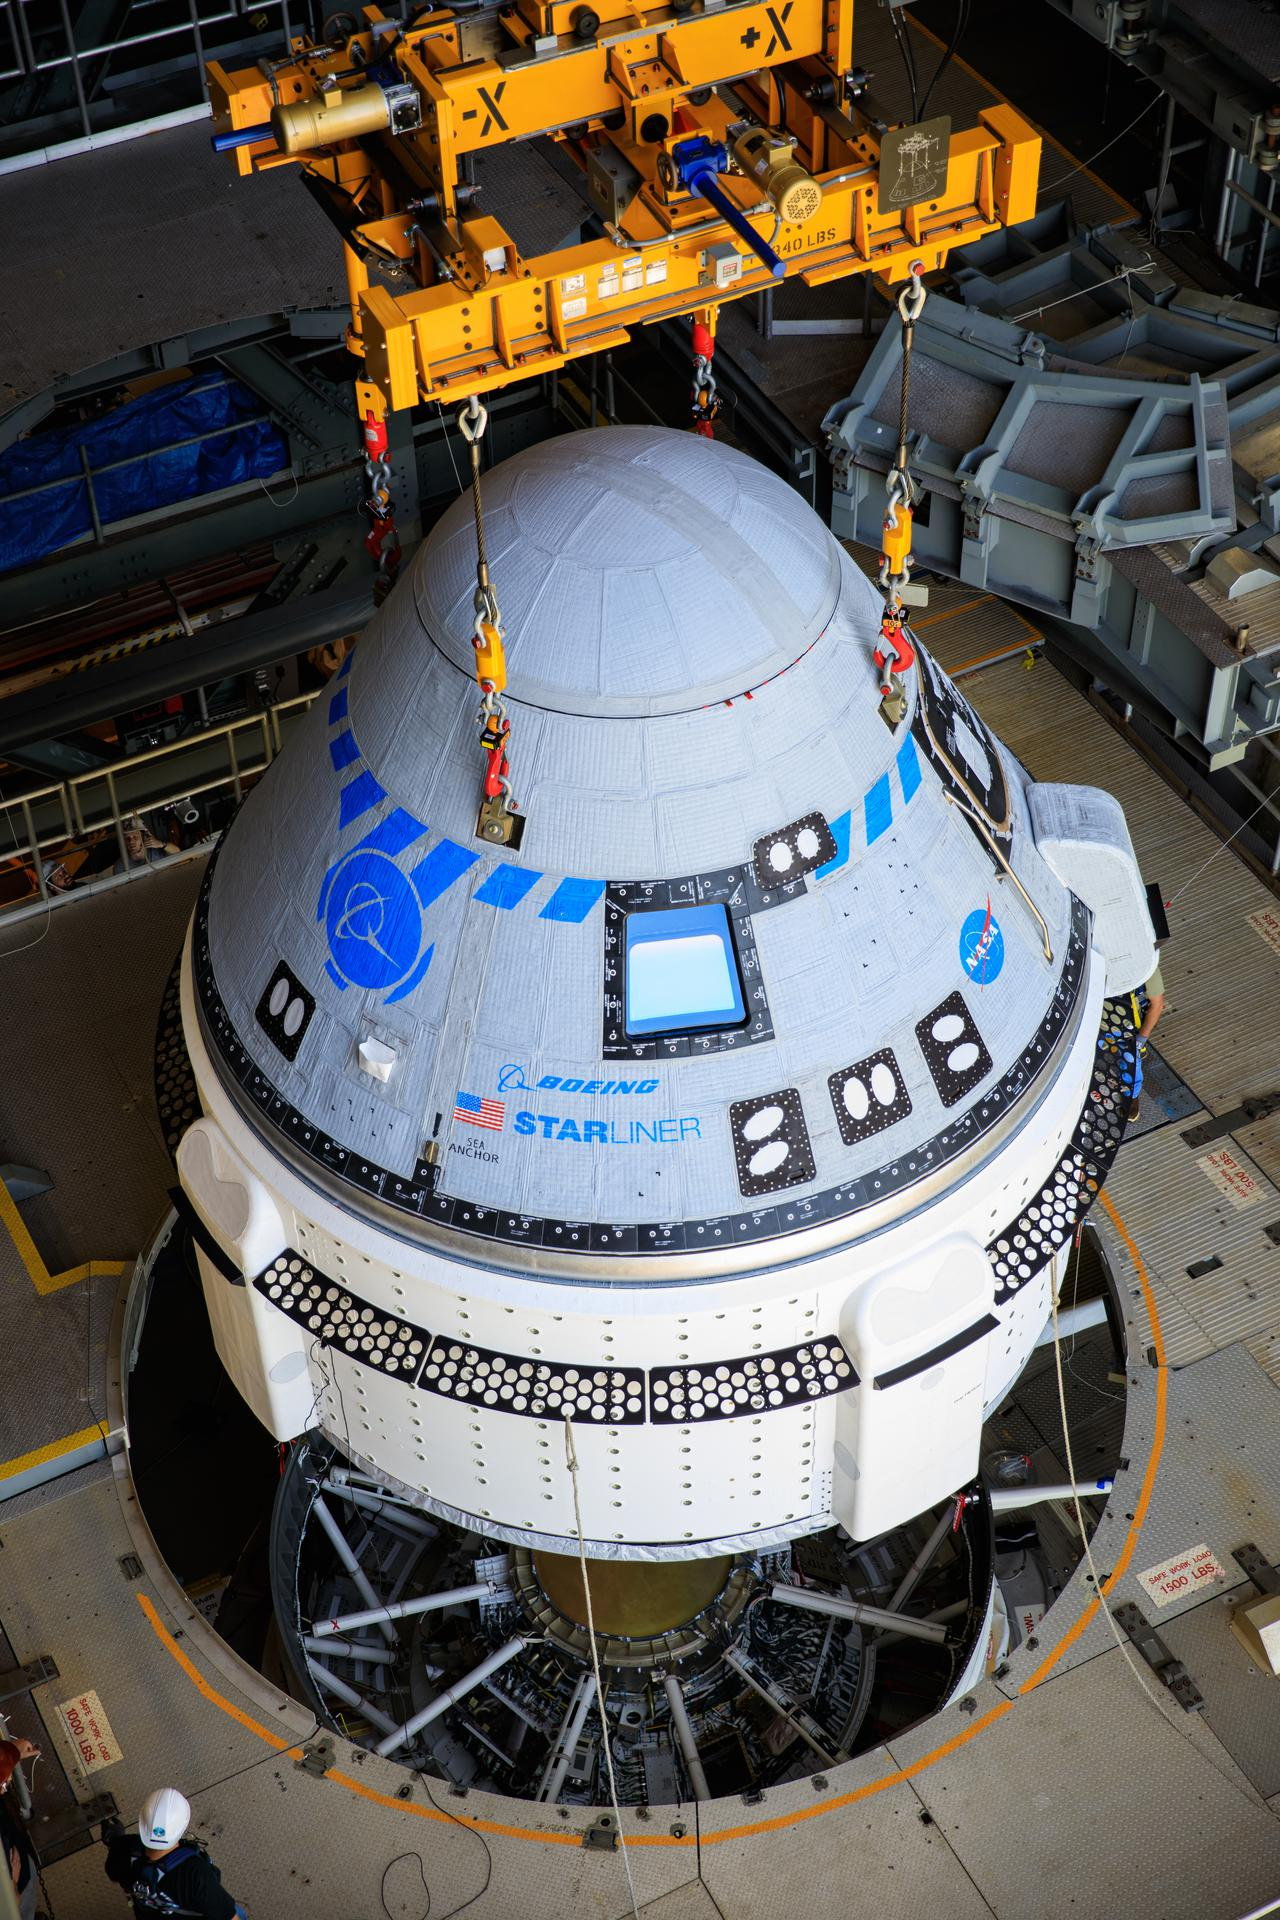 An aerospace load monitoring system lifts the Boeing CST-100 Starliner spacecraft at the Vertical Integration Facility at Space Launch Complex-41 at Florida's Cape Canaveral Space Force Station